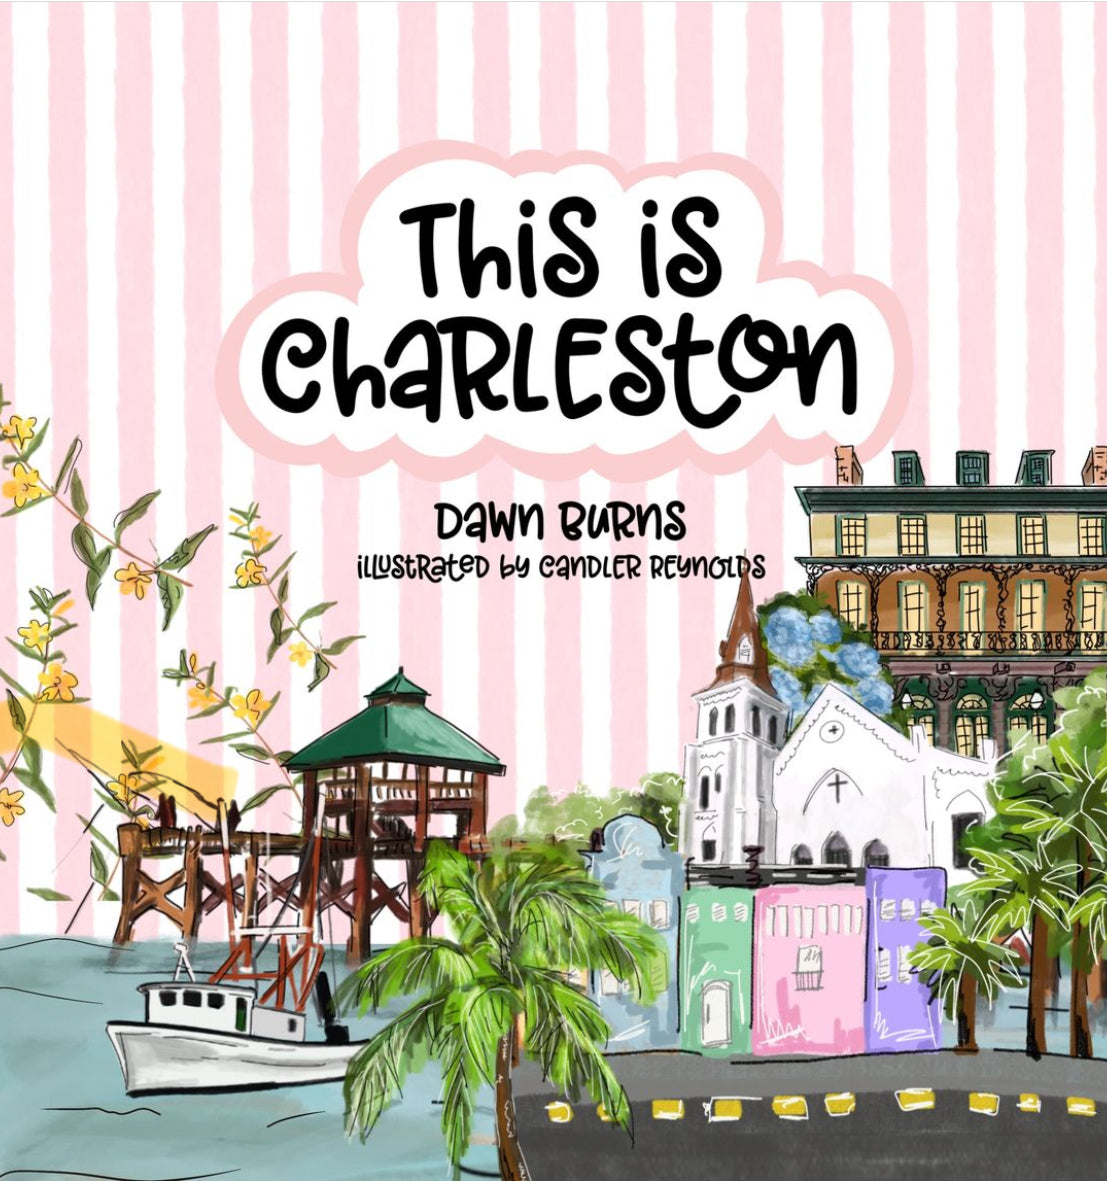 This is Charleston by Dawn Burns